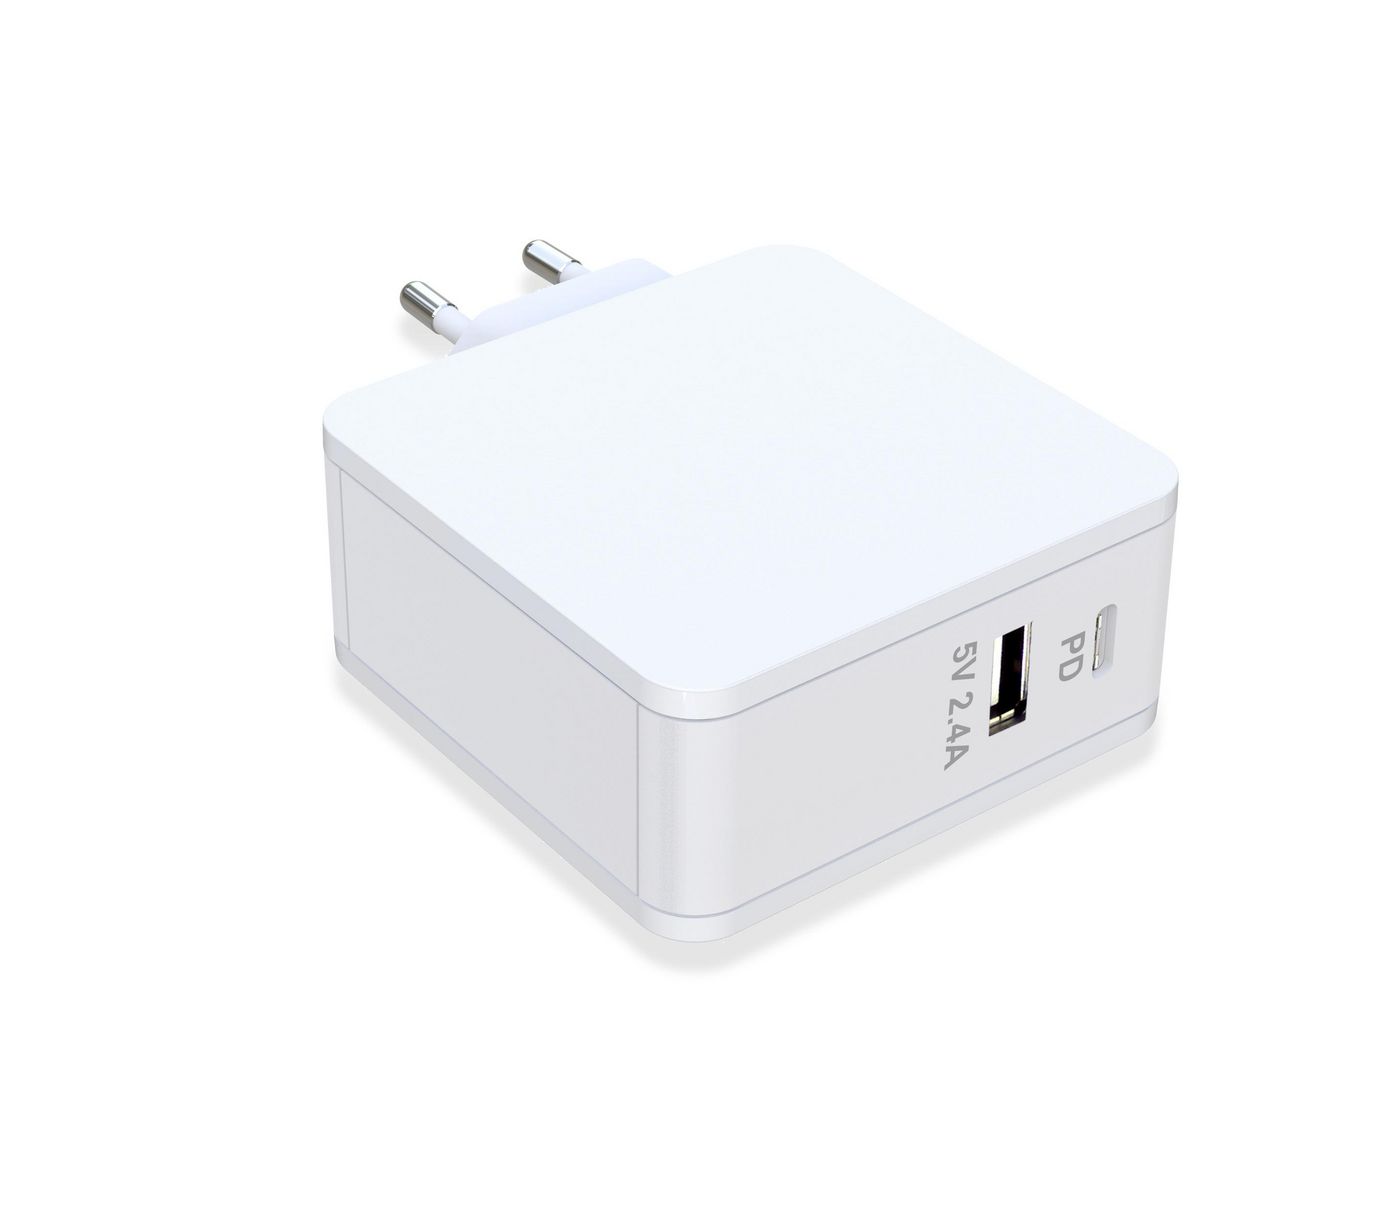 MBXUSBC-AC0001, CoreParts USB-C Power Adapter 45W 5V2A-20V2.25A USB PD  Plug: USB-C EU & UK Wall - 5V2A,9V2A,12V2A,15V3A,20V2.25A, Compatible with  all brands of laptops and mobile devices